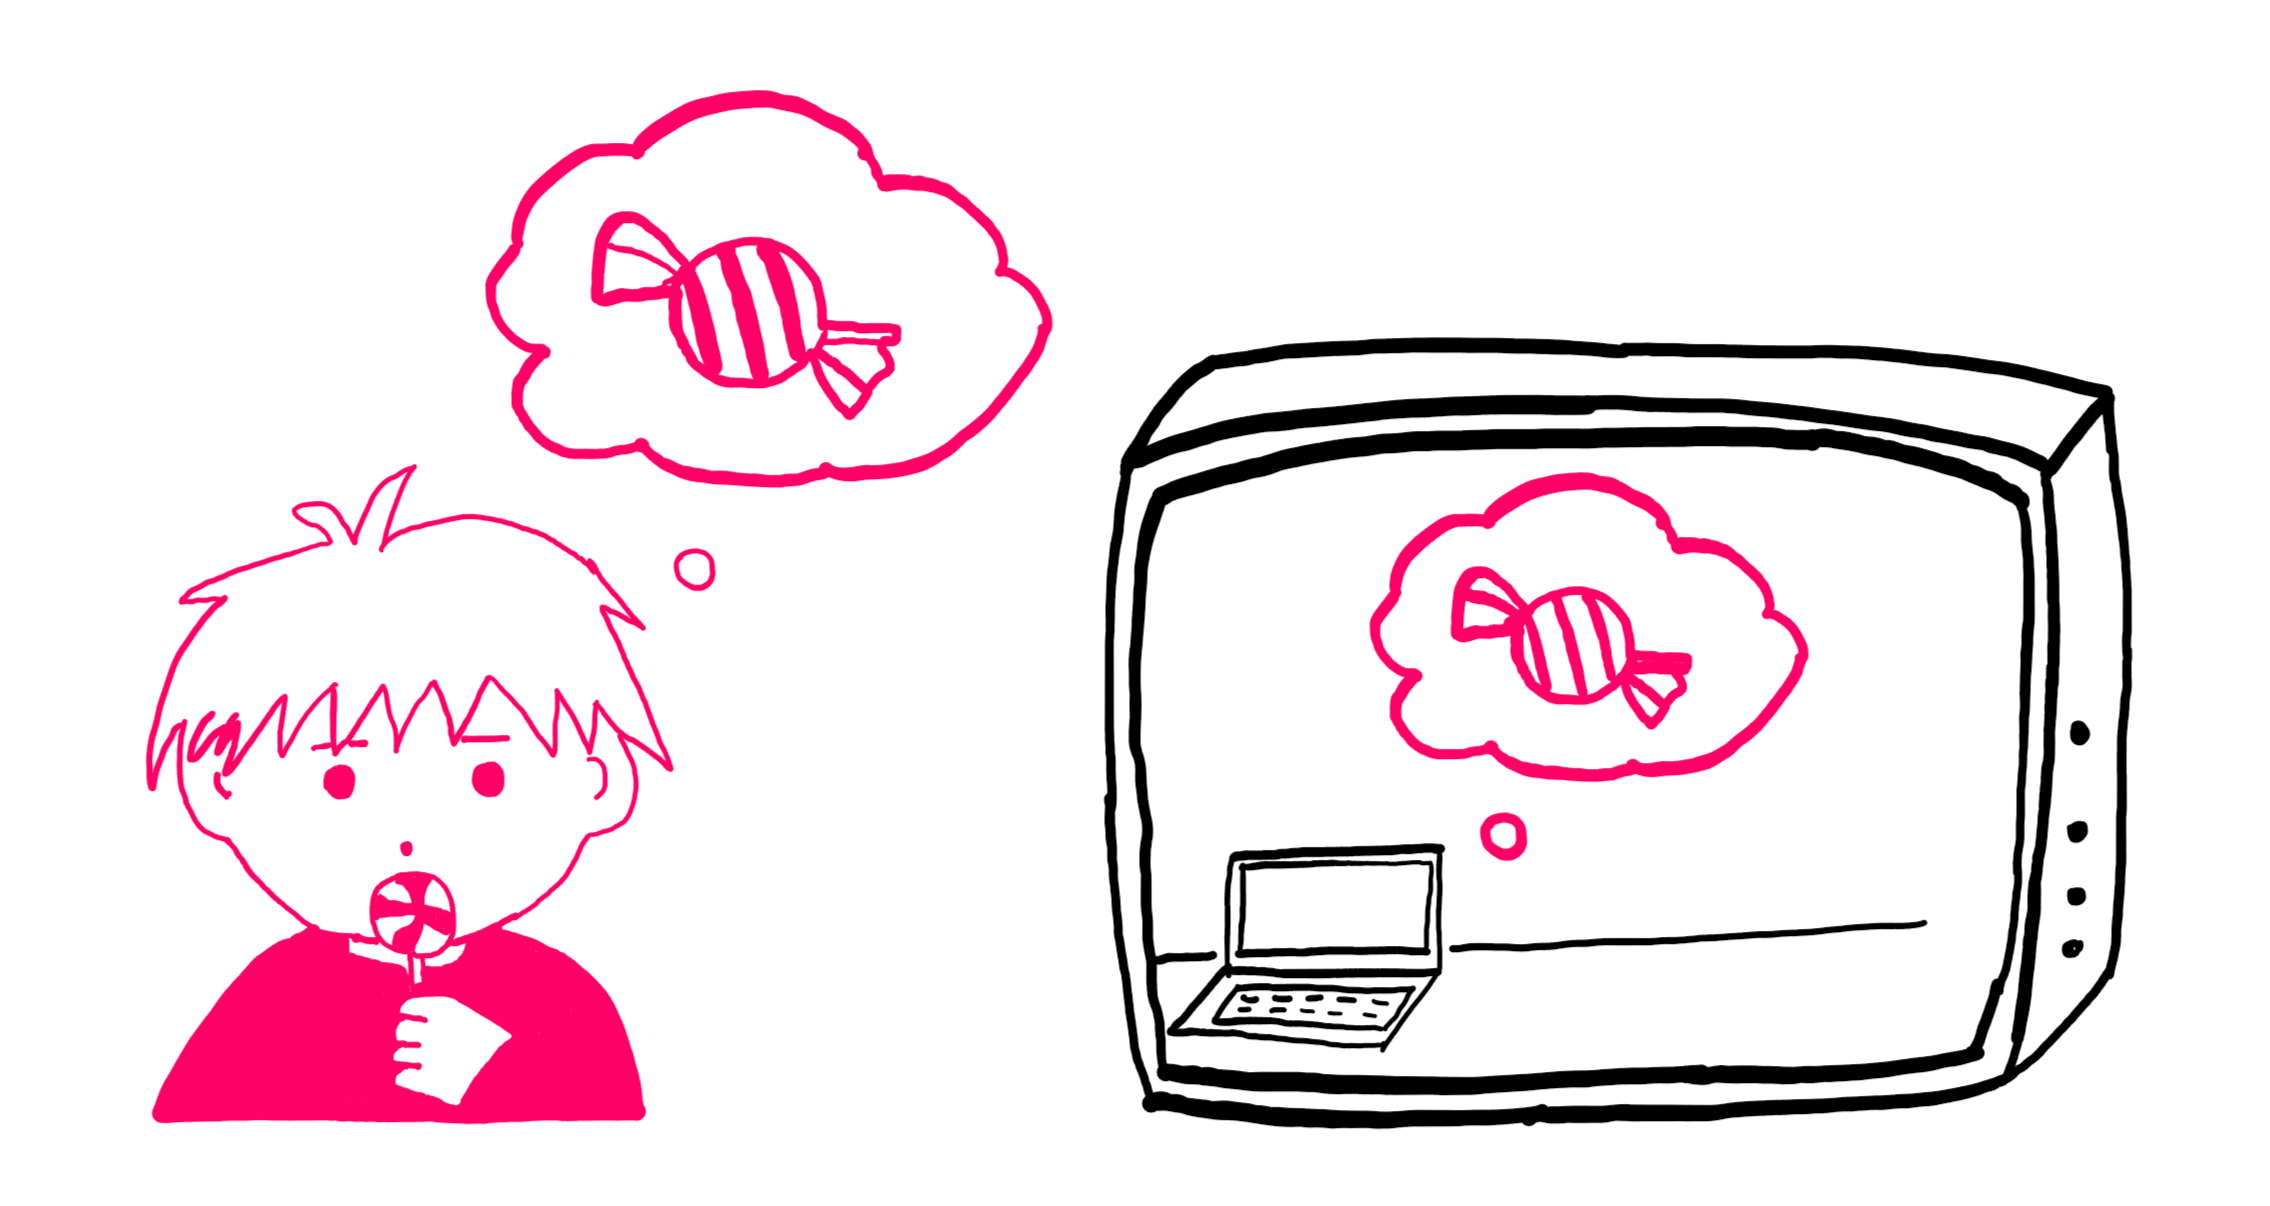 How To Understand The Computational Irreducibility - A cartoon showing a boy dreaming with a candy dream of a candy seeing a computer in a television dreaming of the same candy.